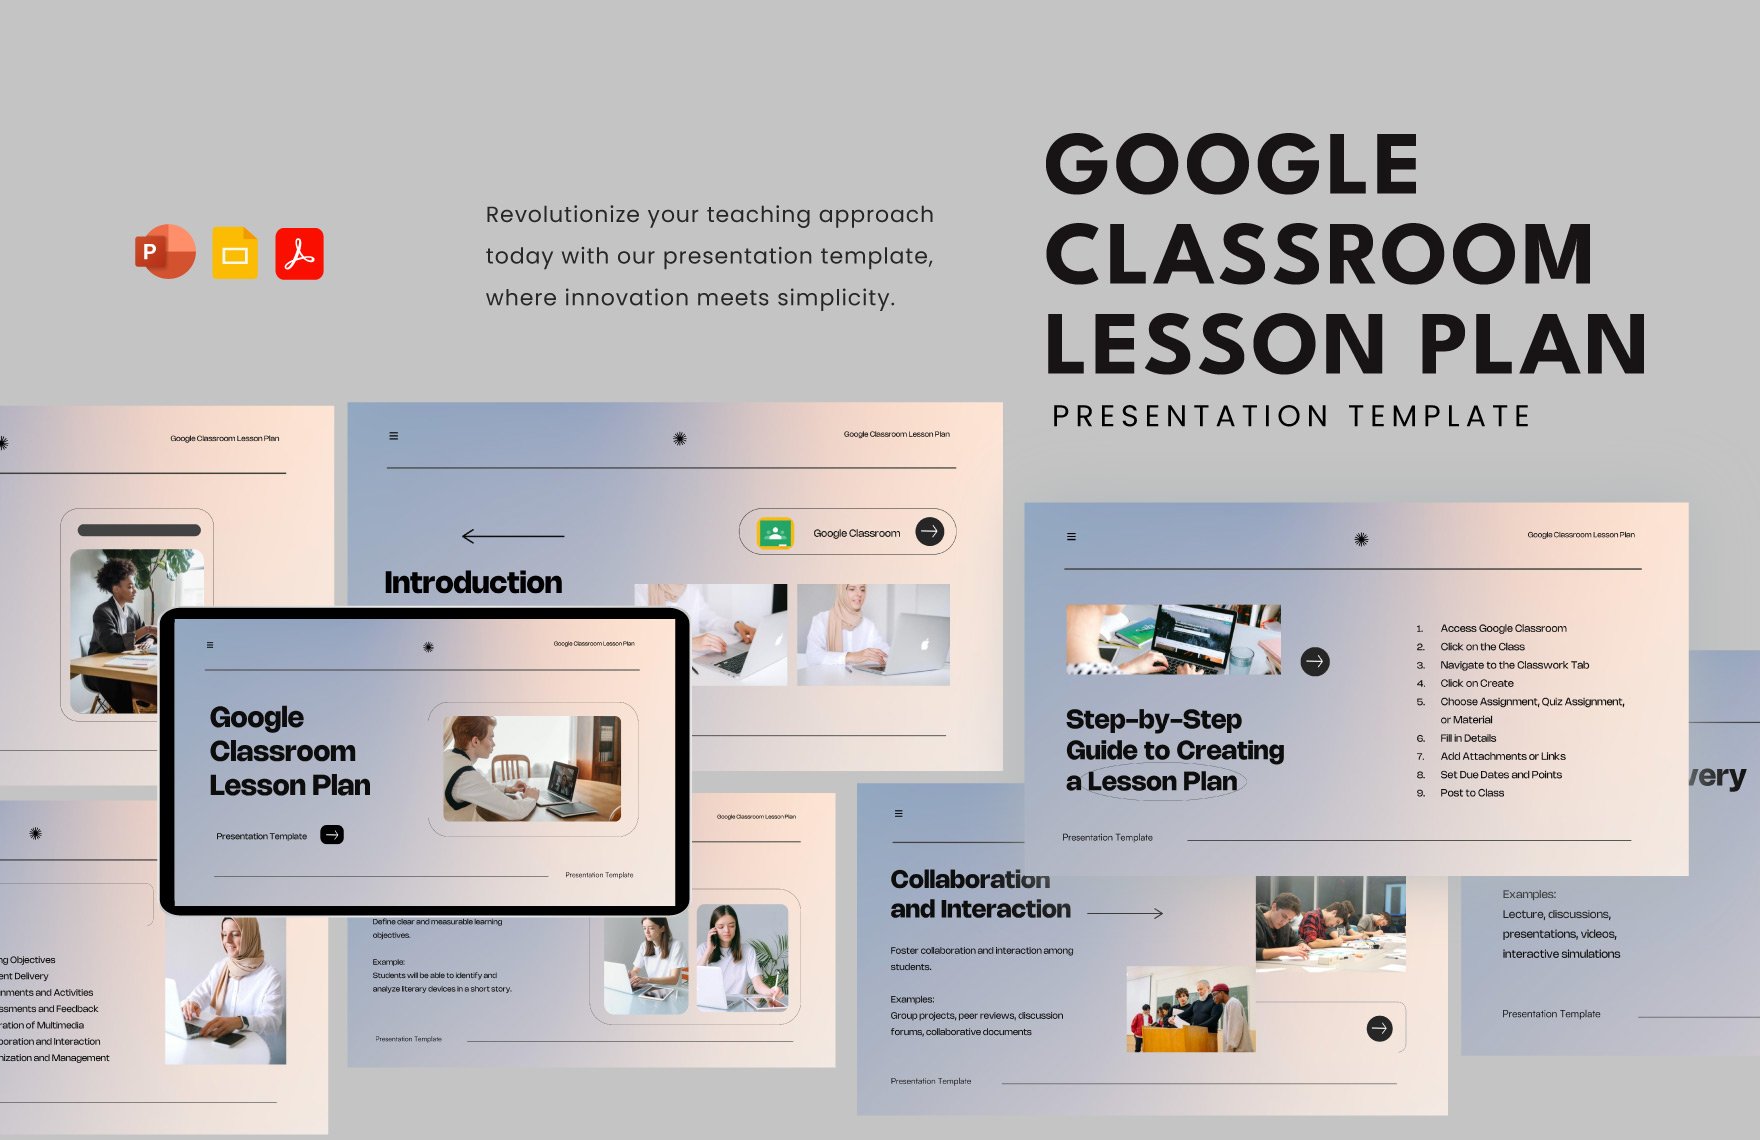 Google Classroom Lesson Plan Template in PDF, PowerPoint, Google Slides